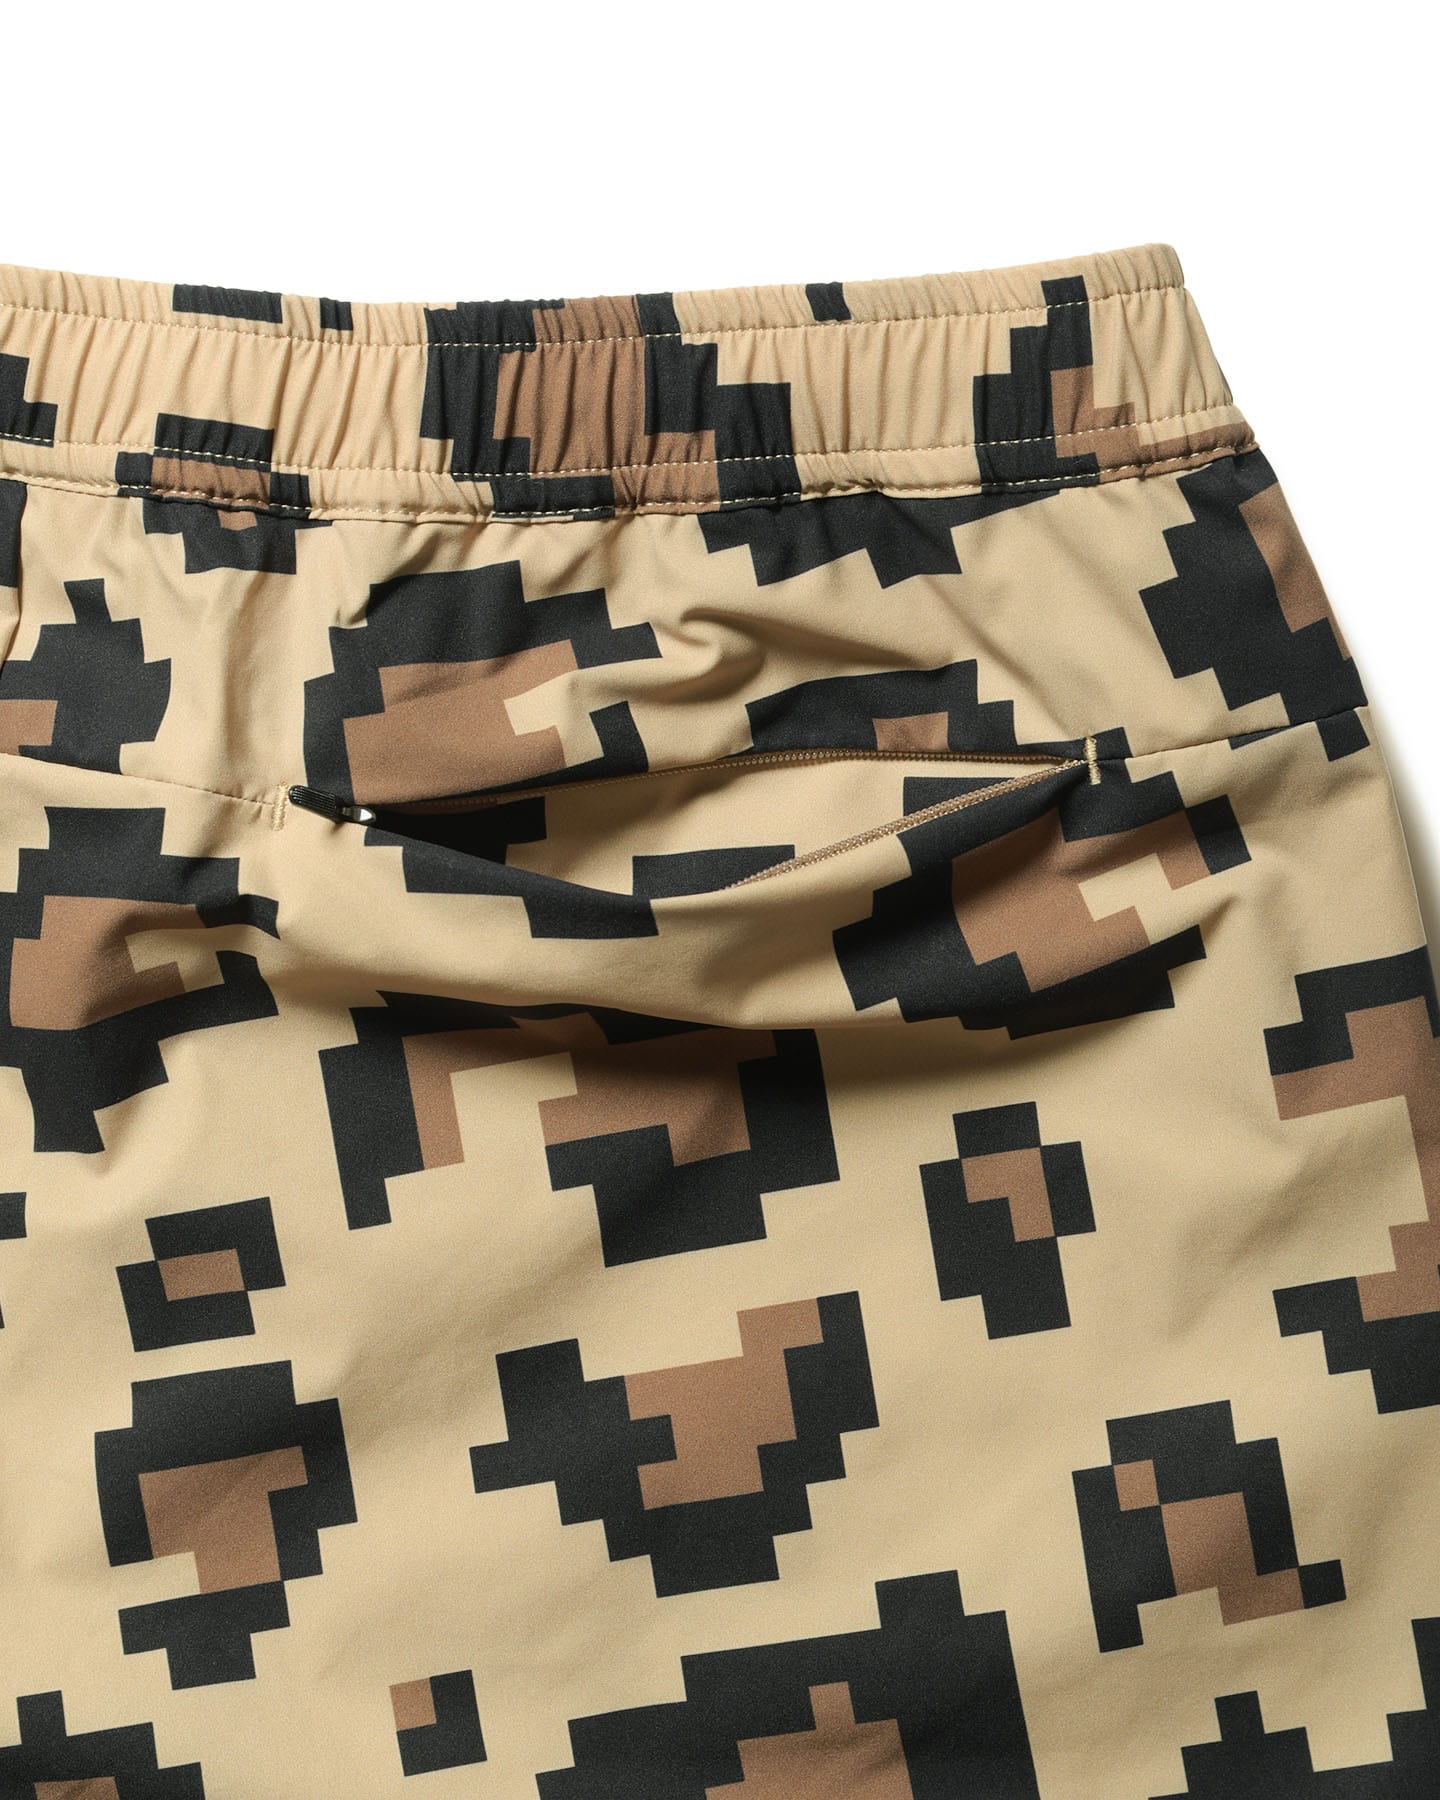 FCRB 22SS PRACTICE SHORTS BROWN LEOPARD - ショートパンツ